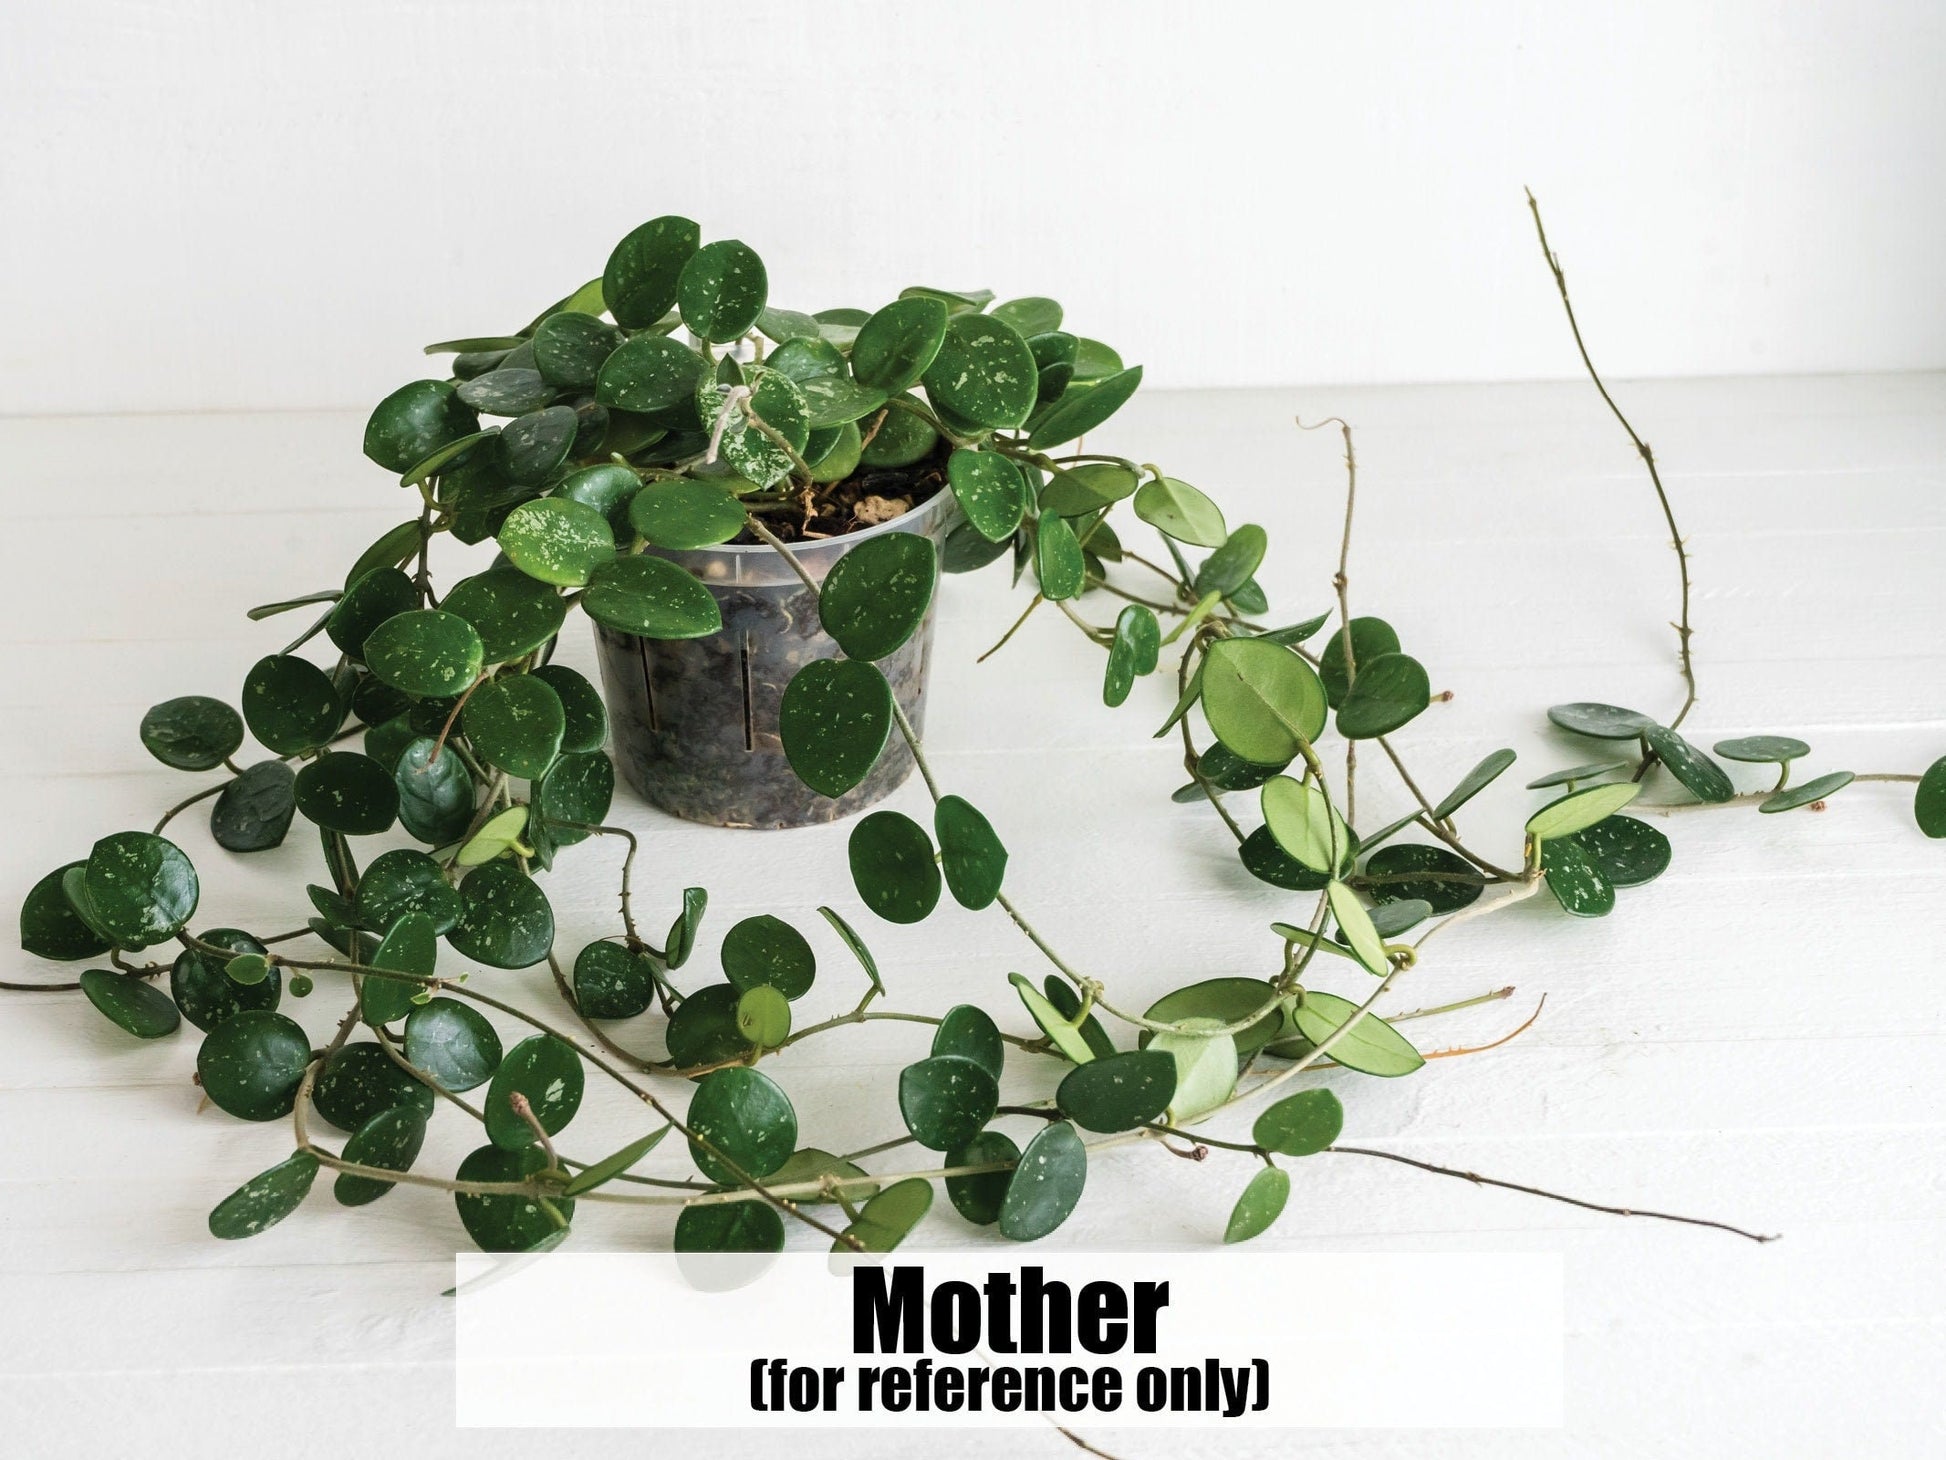 Hoya Mathilde | 2-Inch | Exact Houseplant | Rooted Cutting with New Growth | Free Heat Pack and Insulation